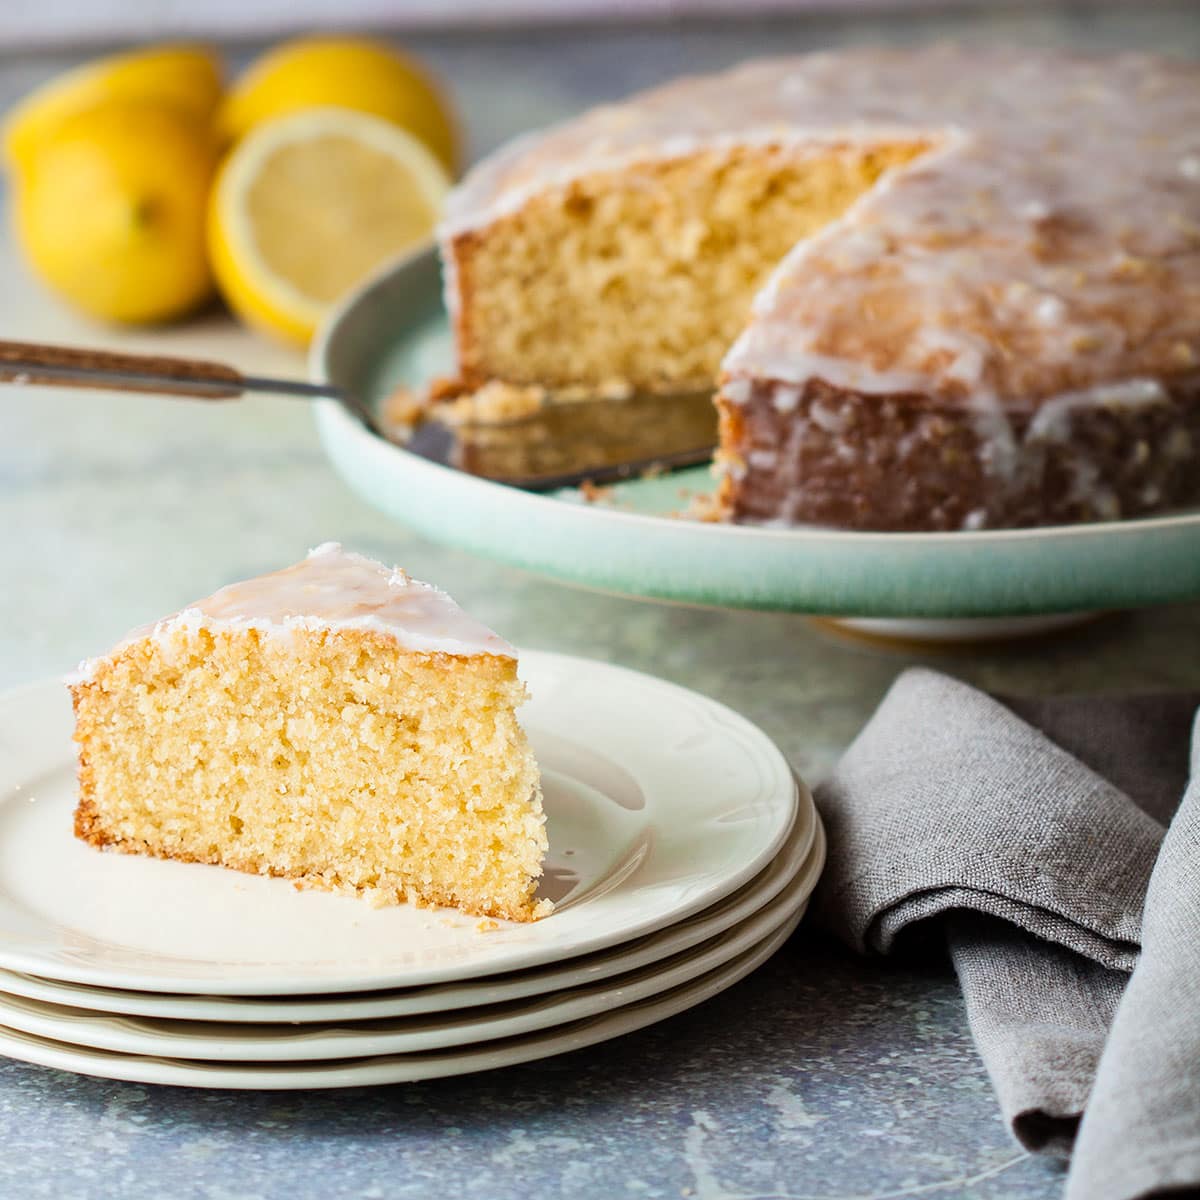 Super Easy Gin And Tonic Lemon Drizzle Cake Larder Love, 49% OFF